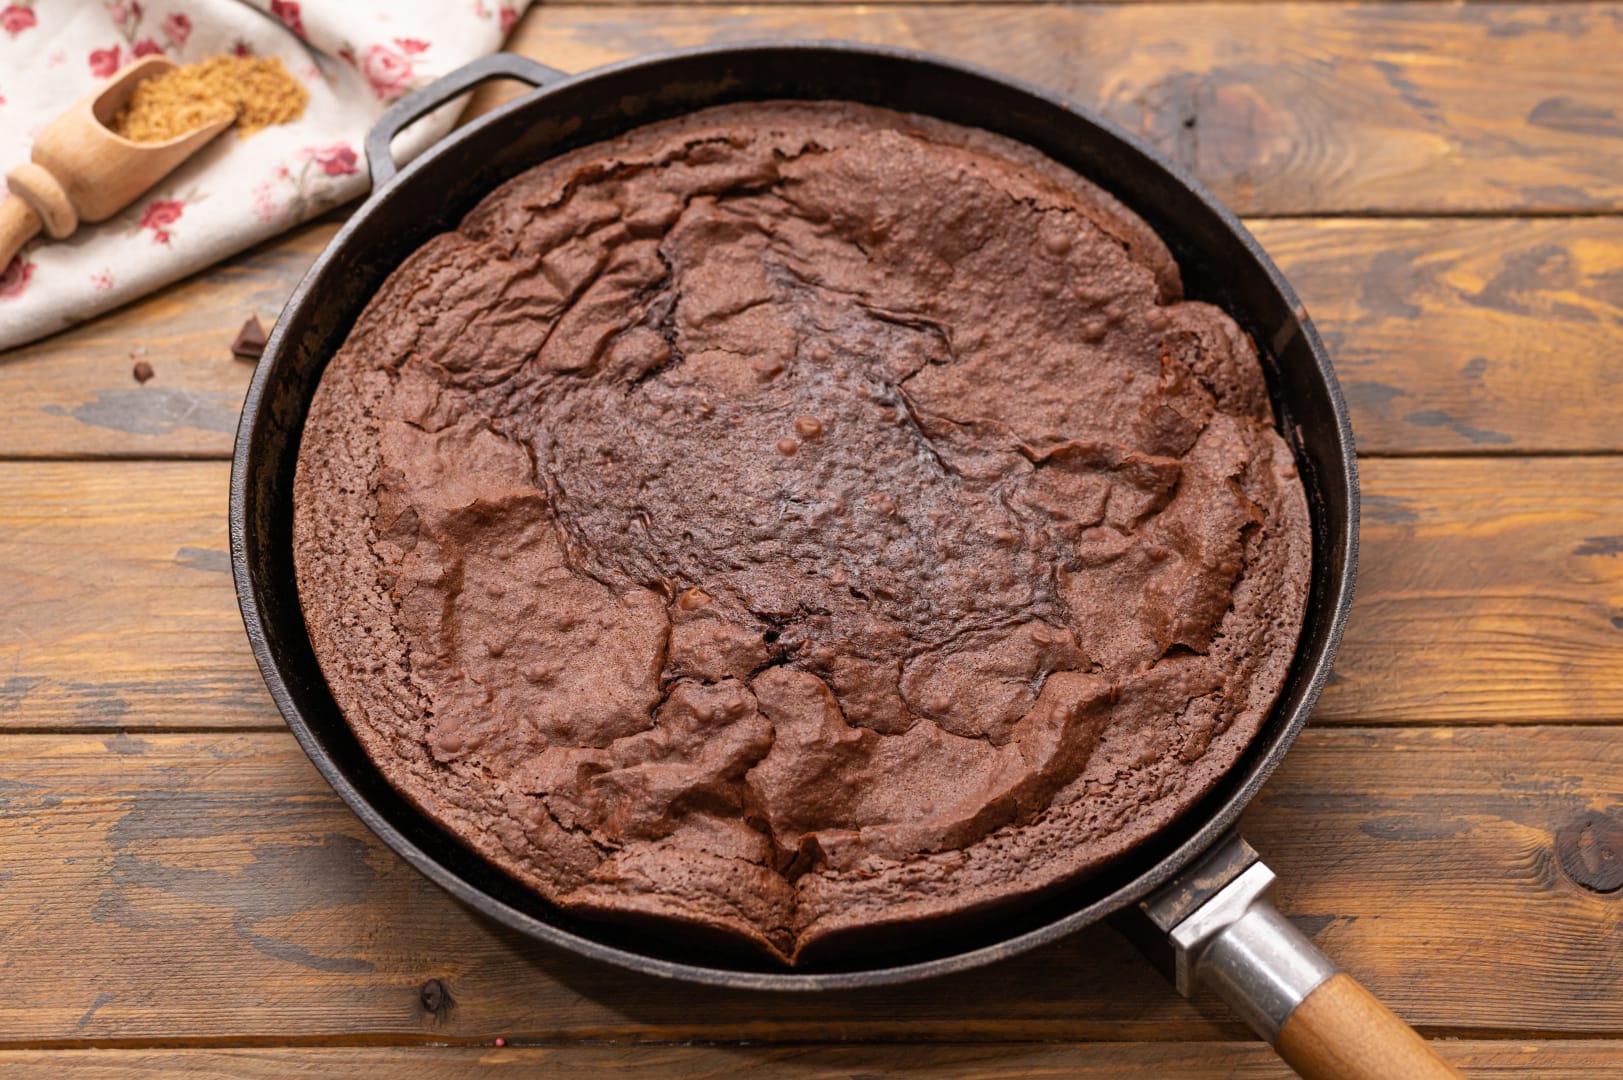 How to Bake Brownies in a Cast Iron Skillet - Homestead How-To